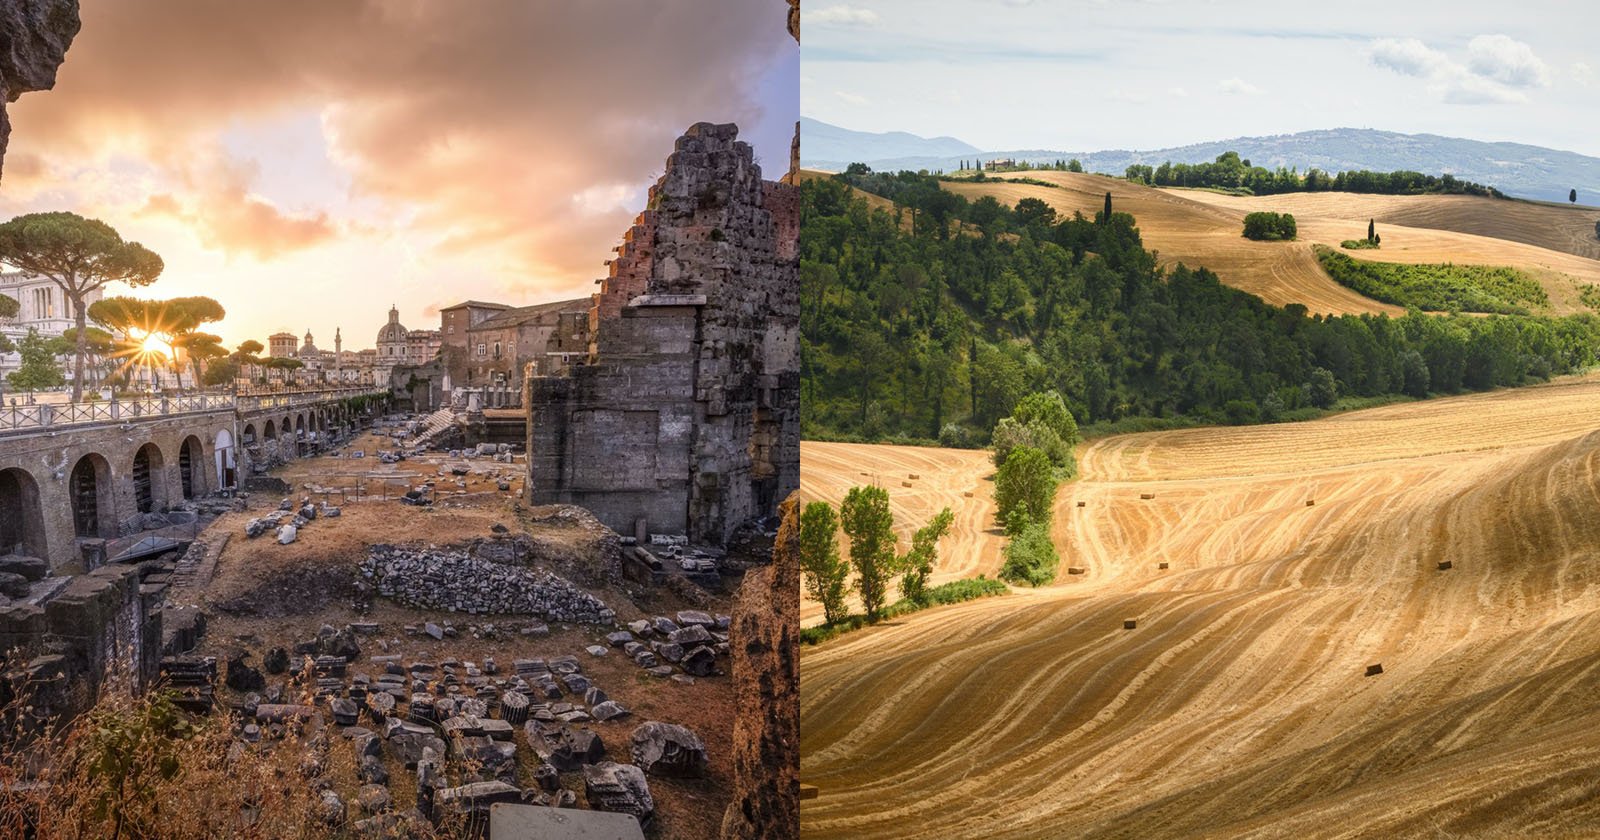 The Power of Landscape Photography and How It Changed Me